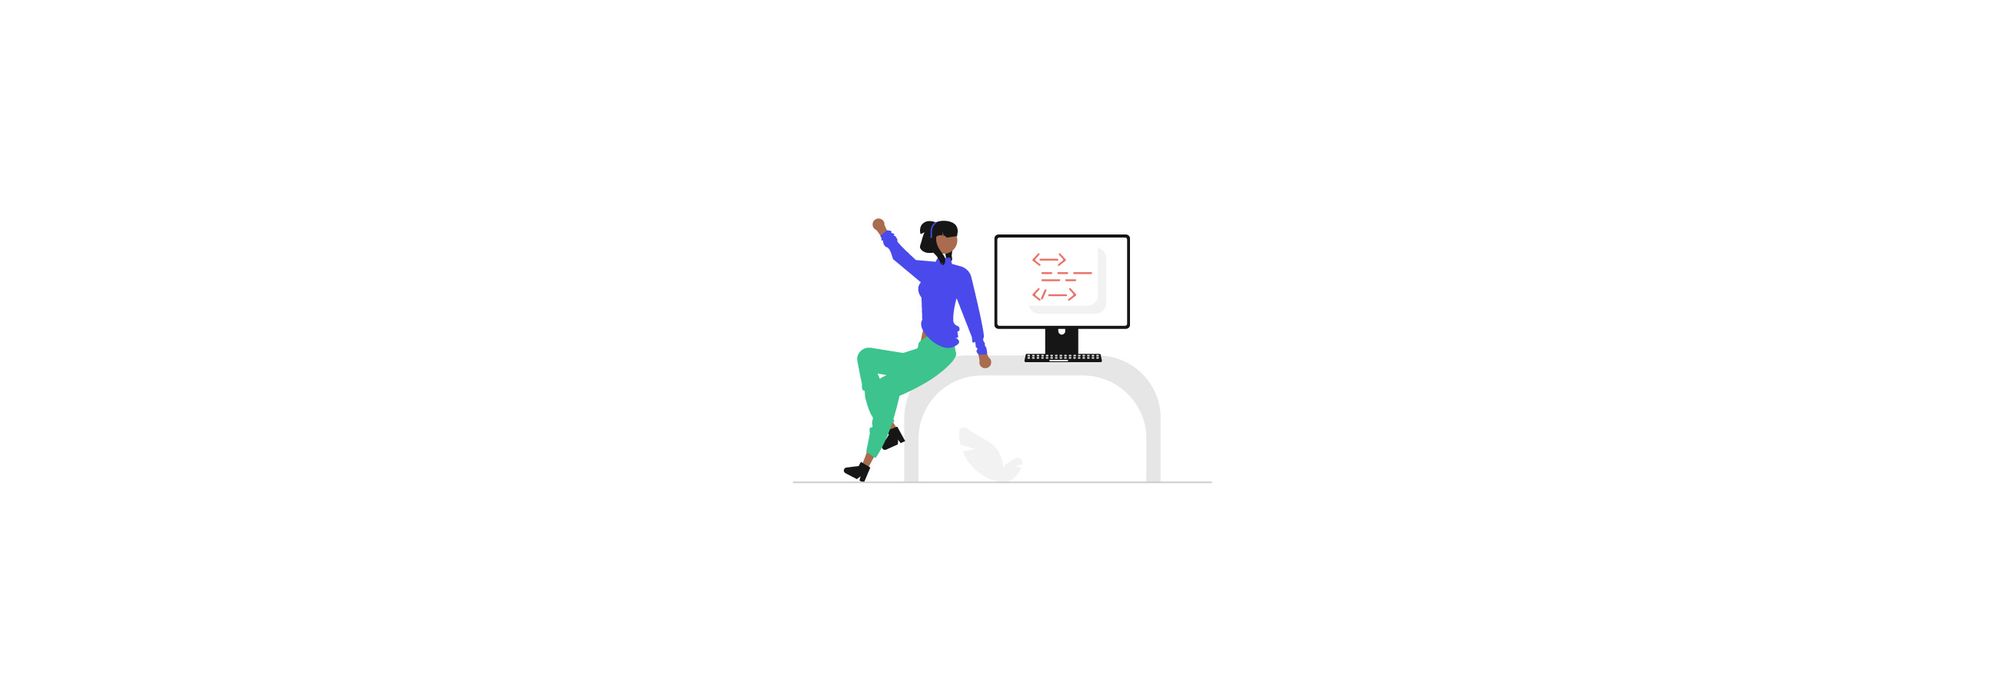 Illustration of a person in a dynamic pose interacting with a computer displaying a coding or formula error, possibly representing the challenges of troubleshooting or coding.